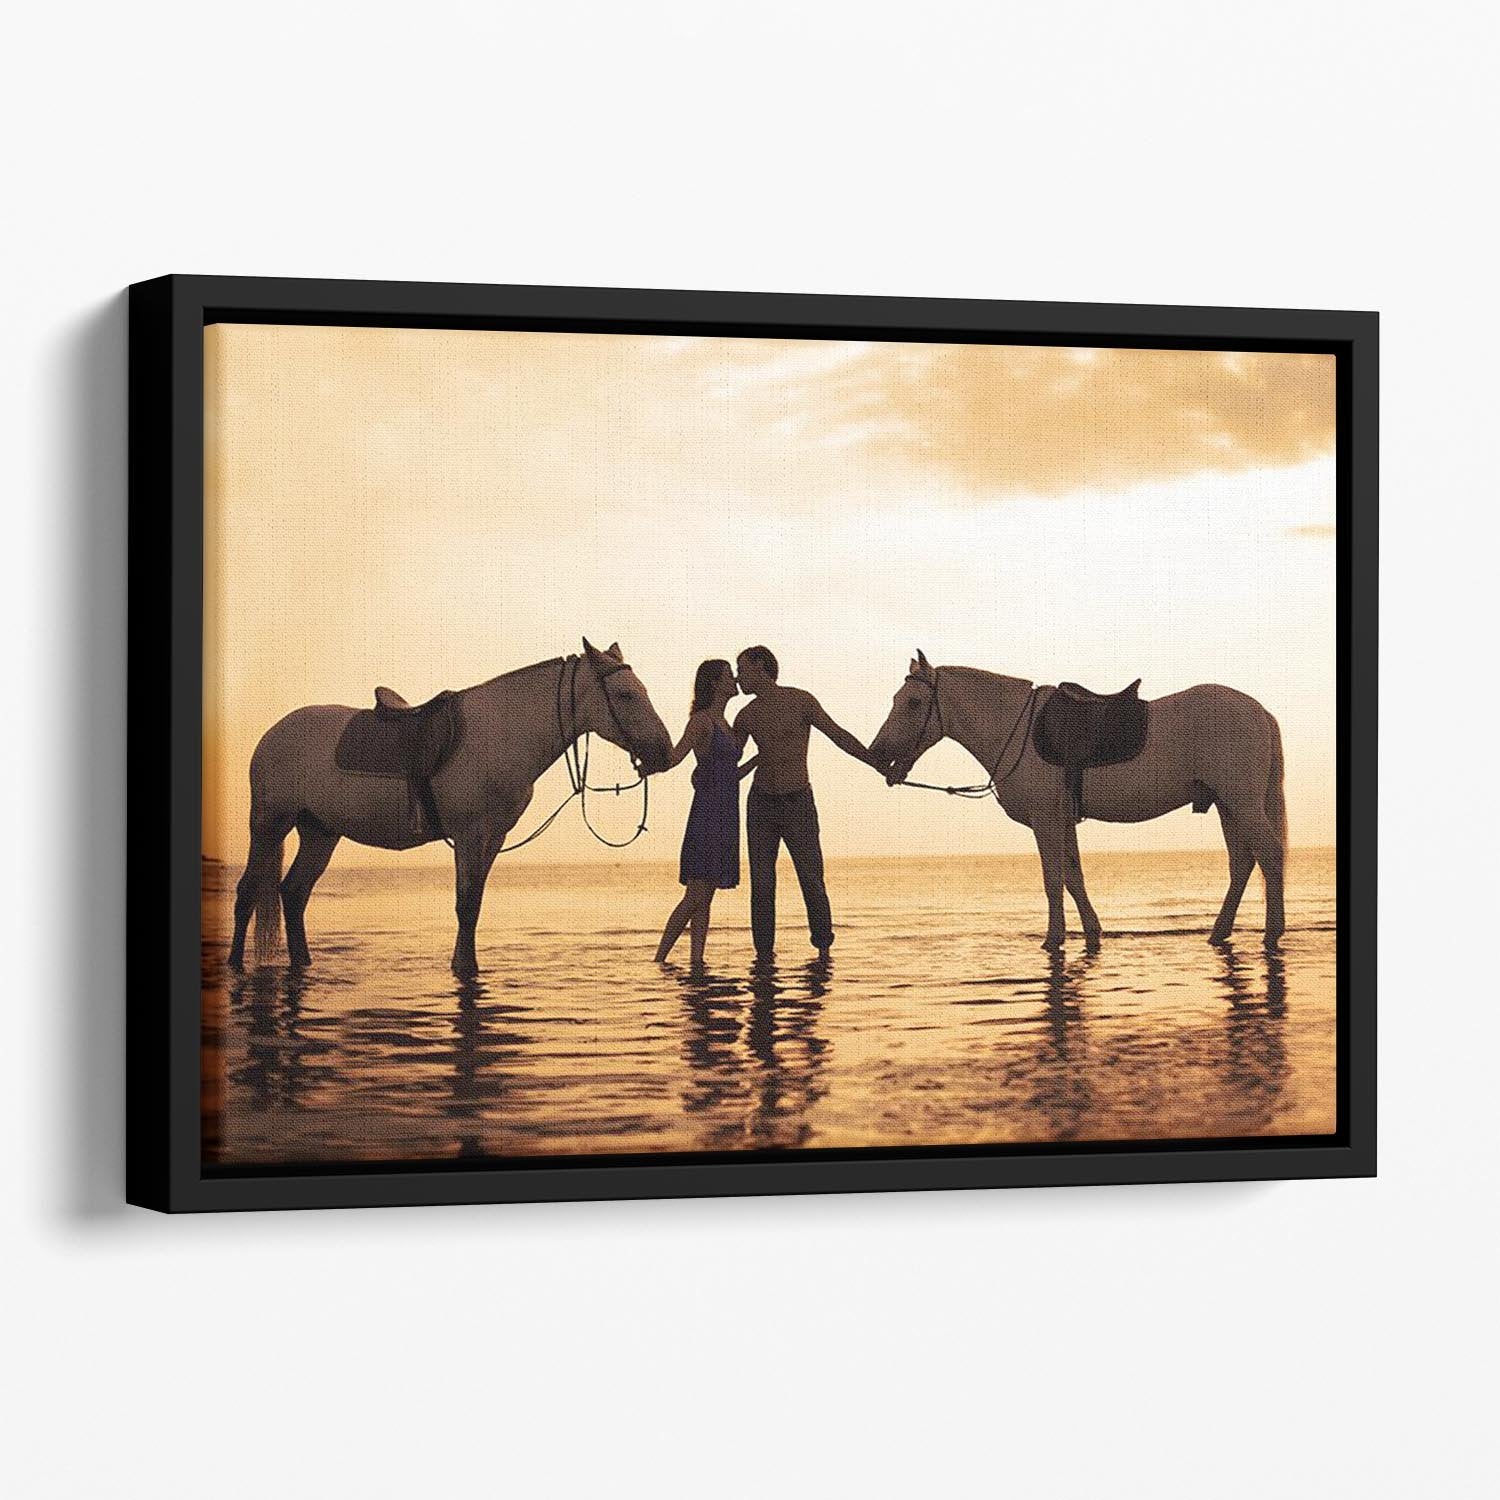 The image of a couple in love at sunset in the sea Floating Framed Canvas - Canvas Art Rocks - 1